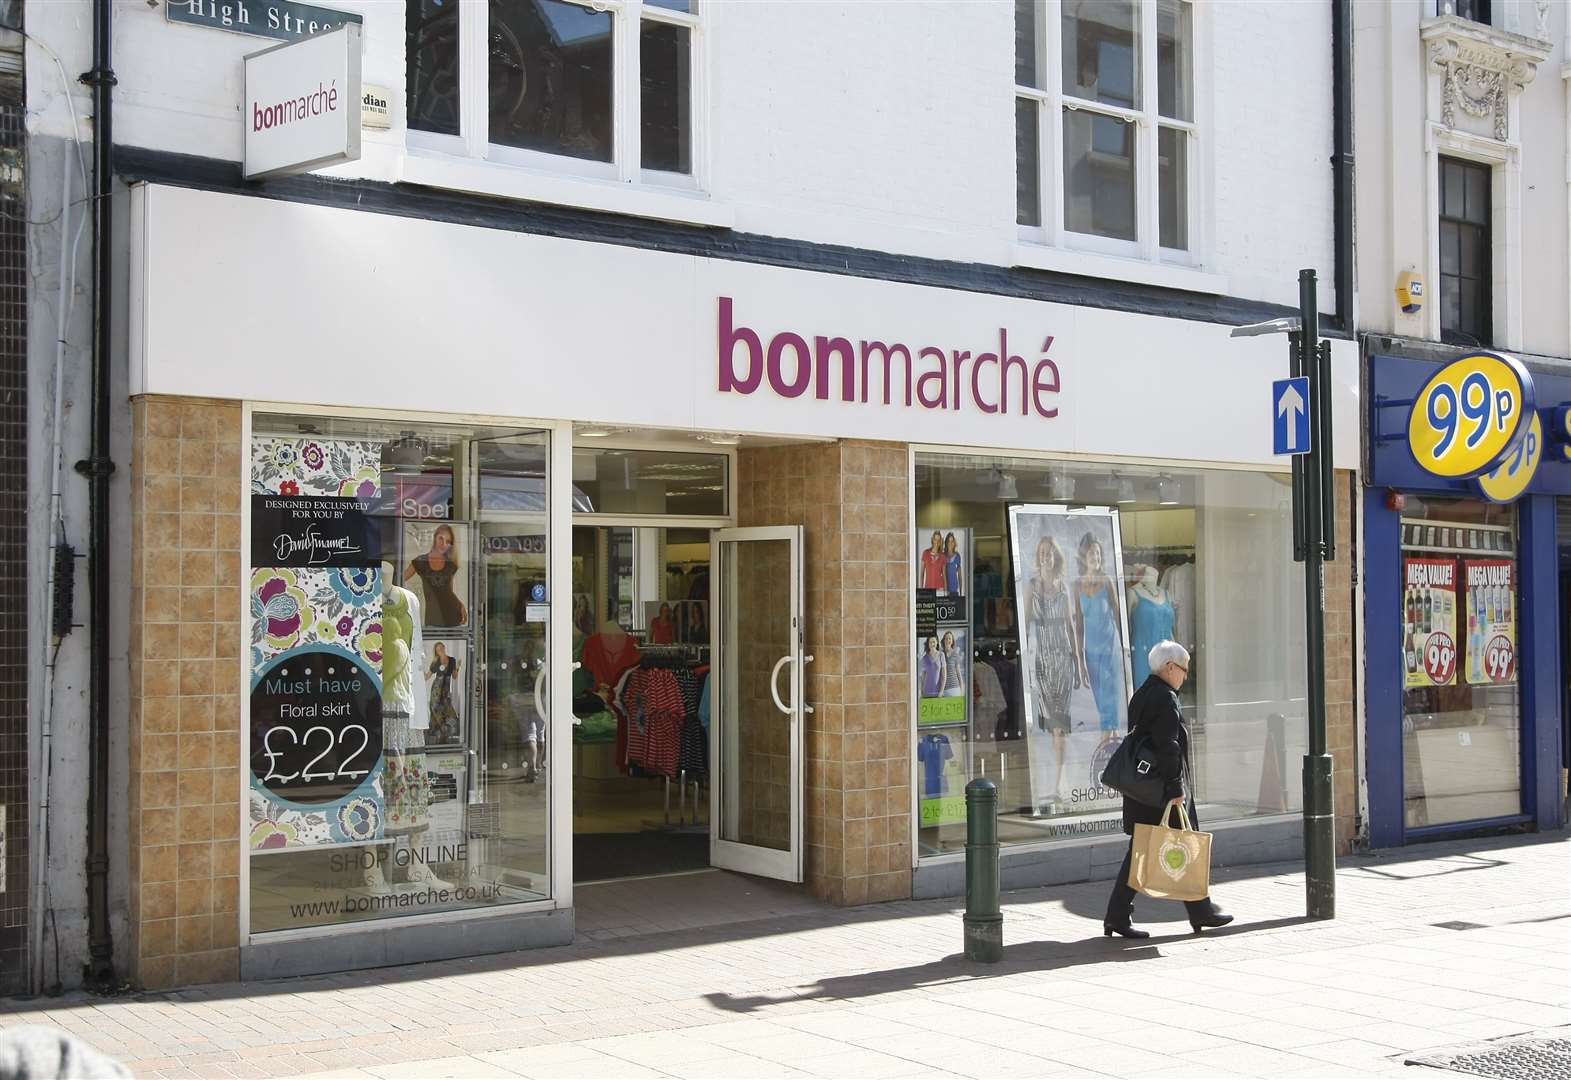 Bonmarche goes into administration again with 1,500 jobs at risk